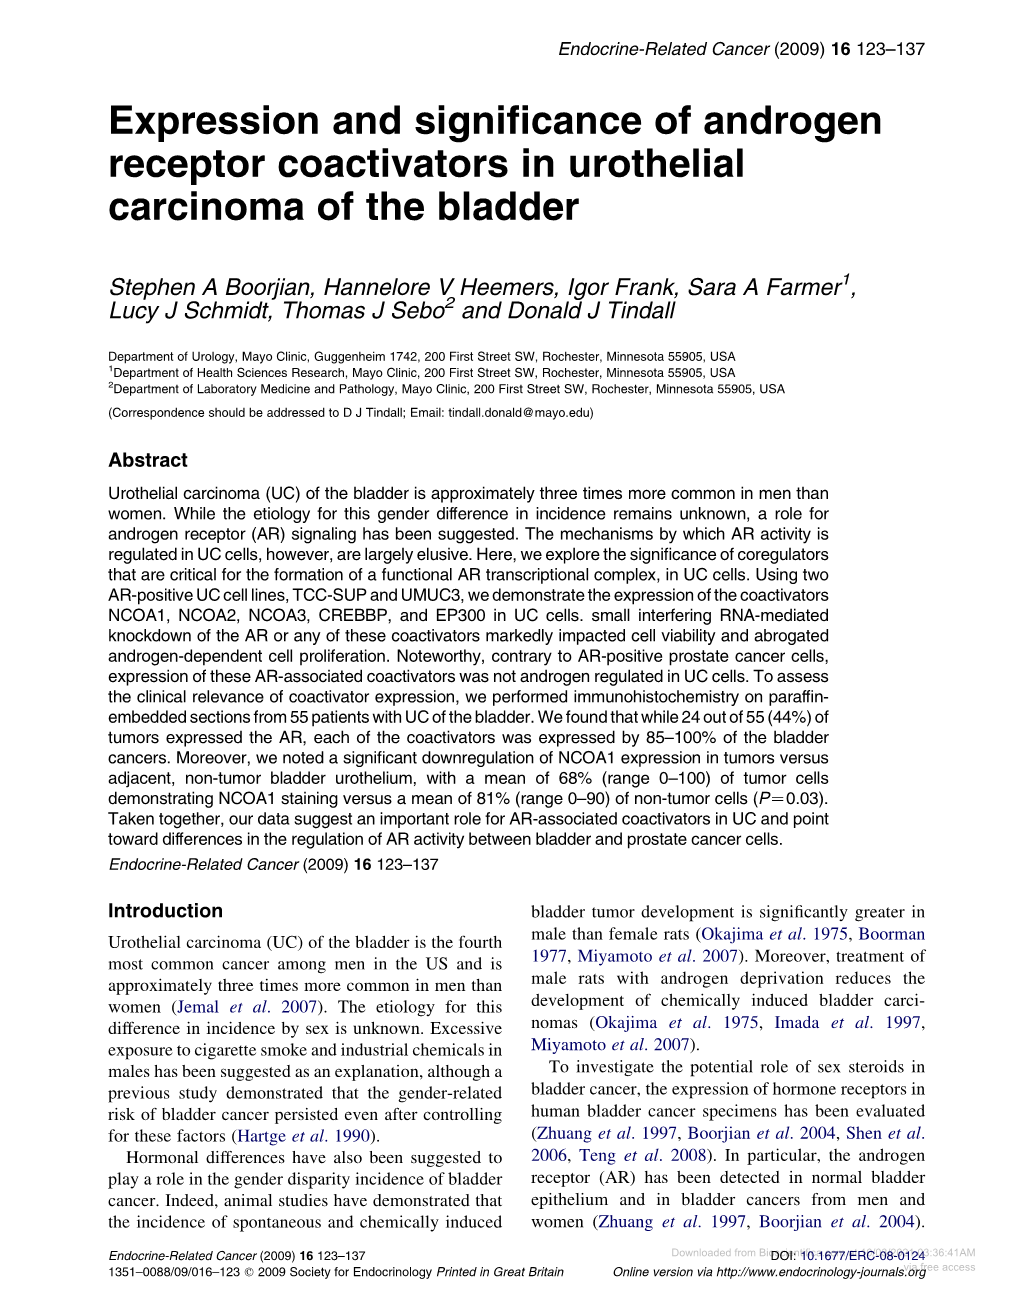 Expression and Significance of Androgen Receptor Coactivators in Urothelial Carcinoma of the Bladder